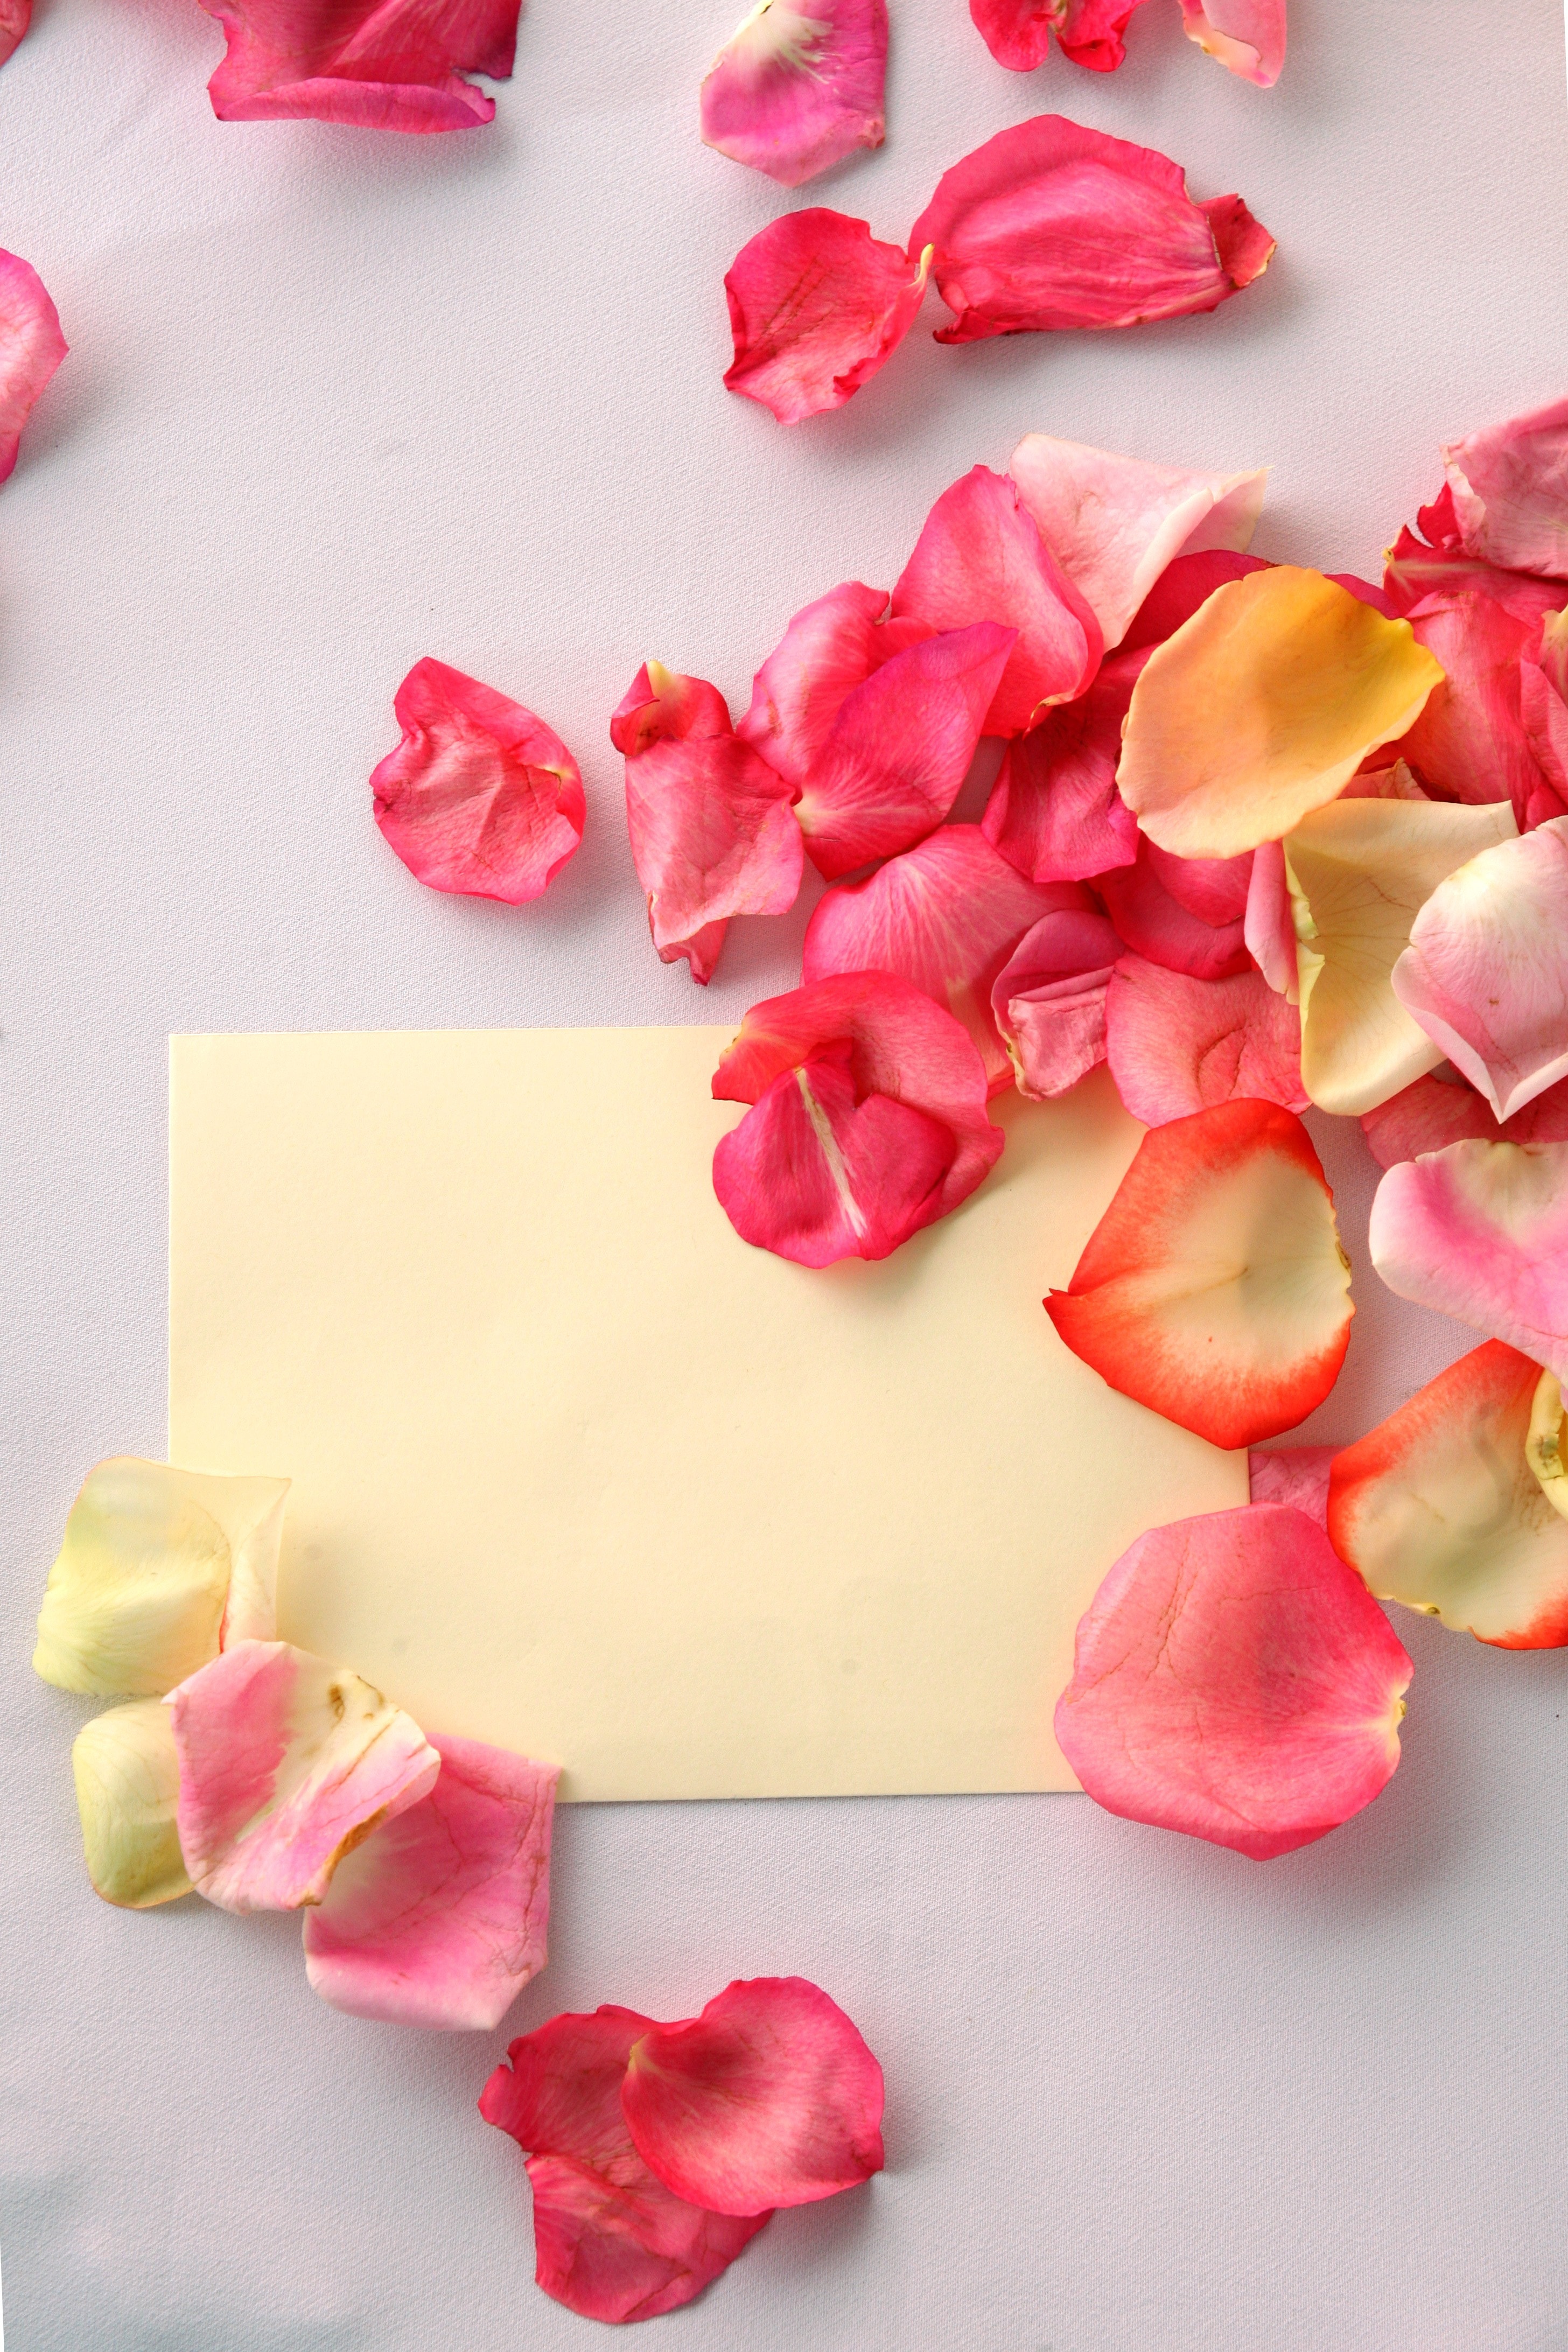 yellow and pink flower petals